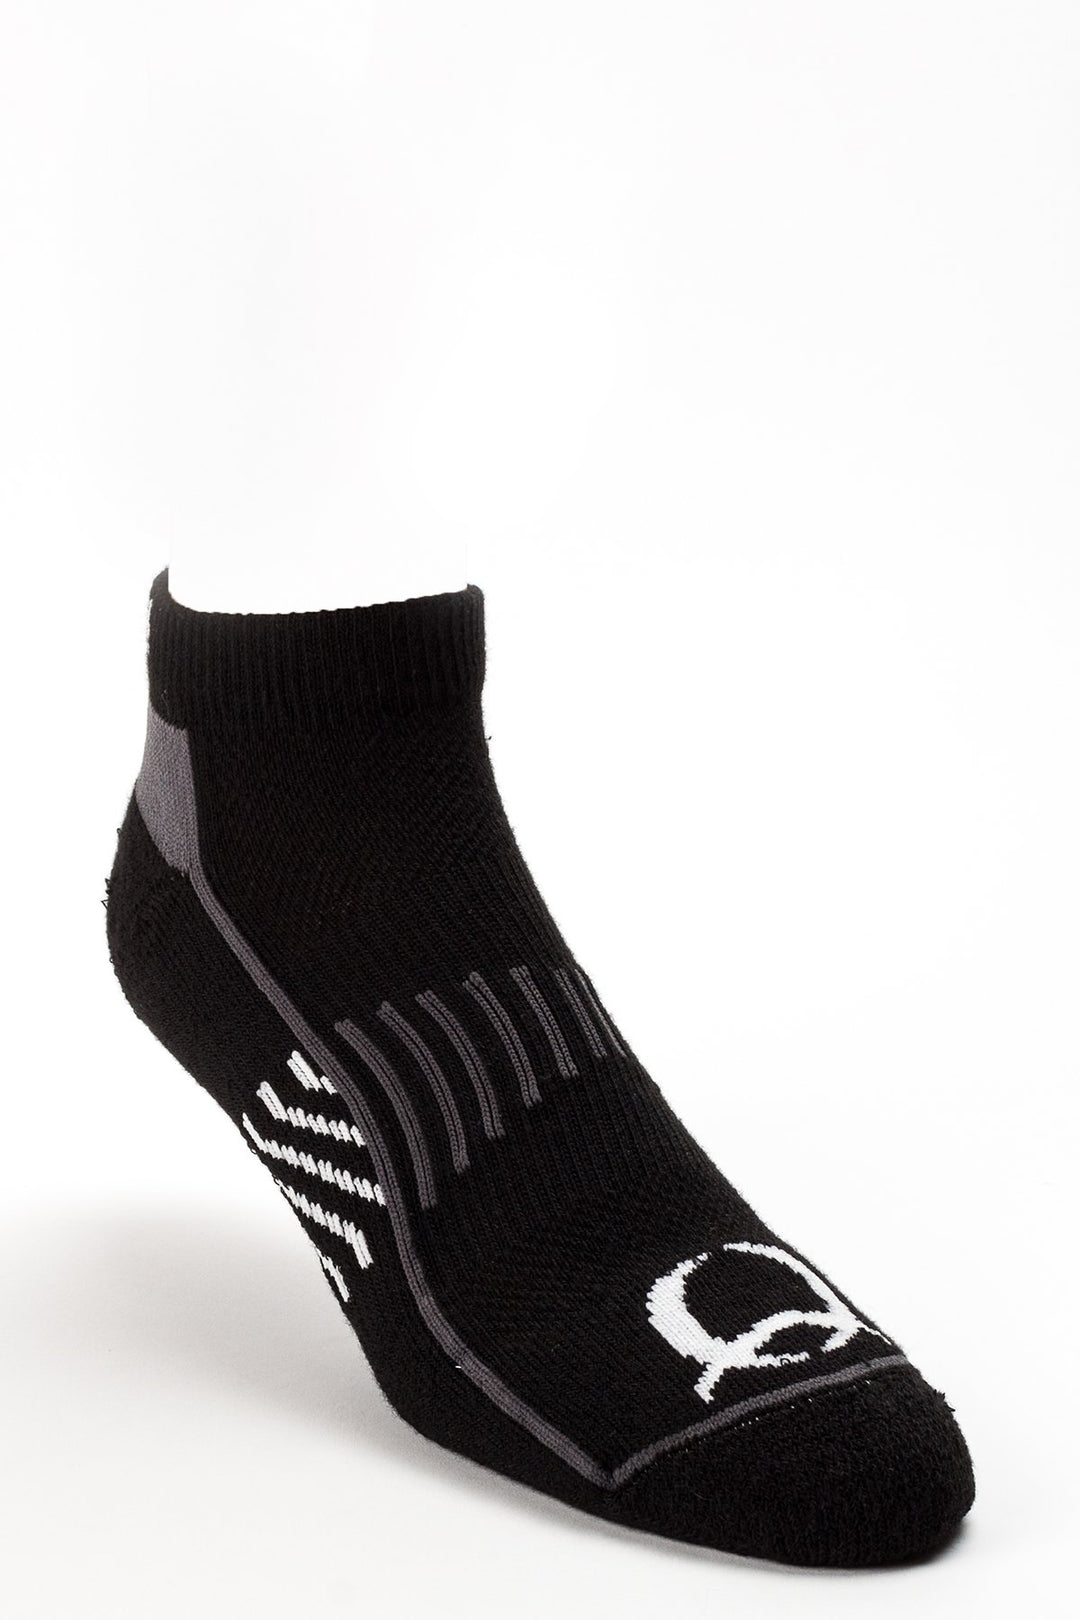 Side view Cinch | Athletic Ankle Sock Black